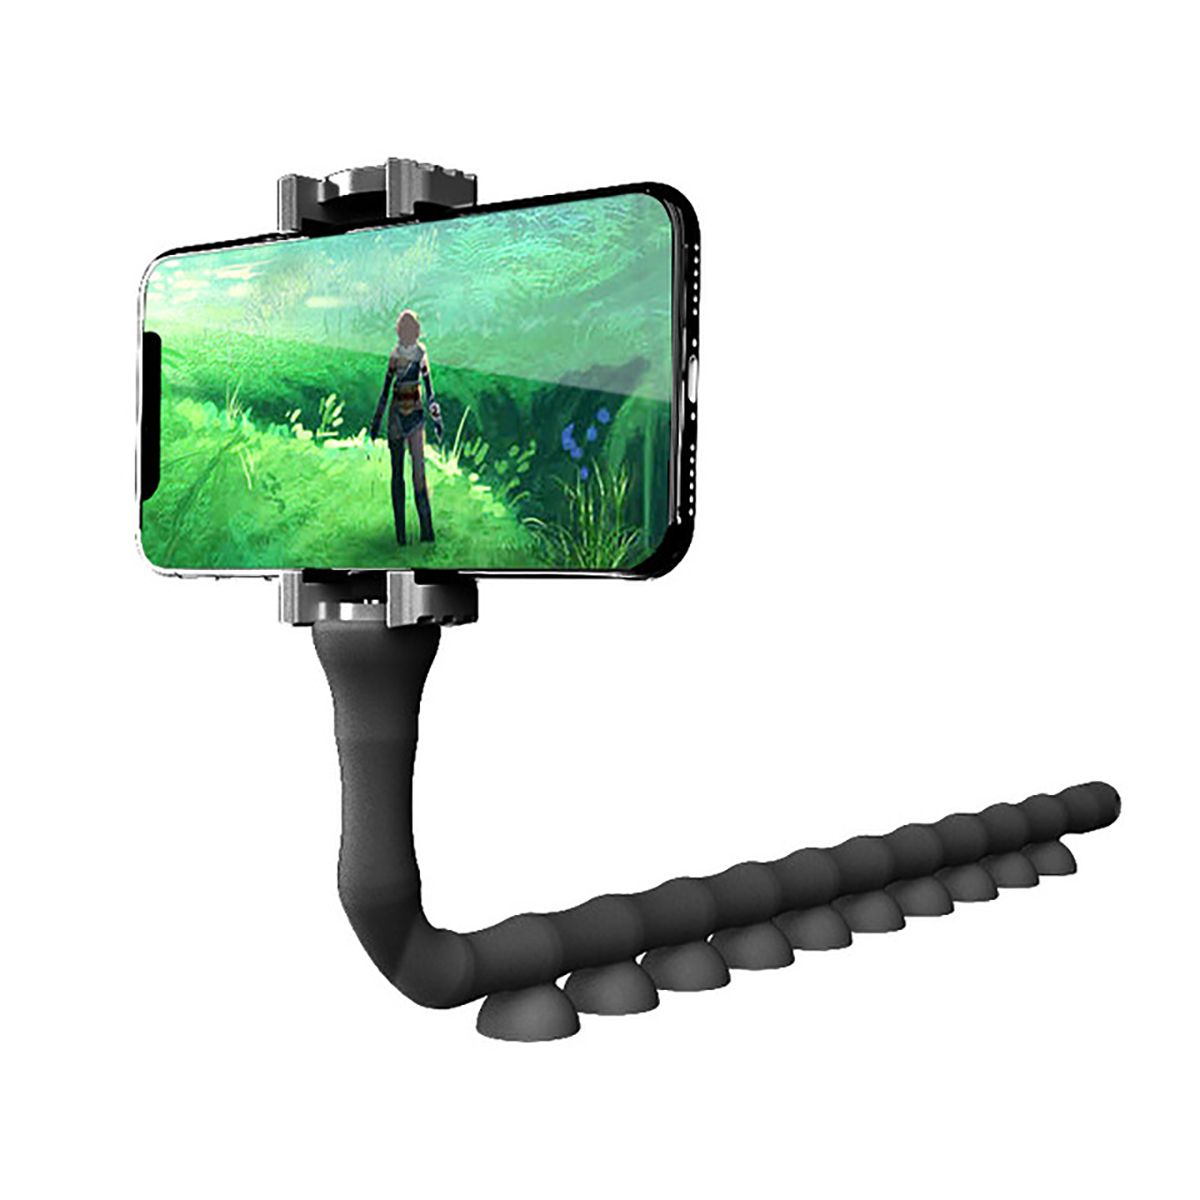 

Adjustable Worm Lazy Holder Phone Holder 360 Degree Rotation For Cell Phone Under 6.0 Inches